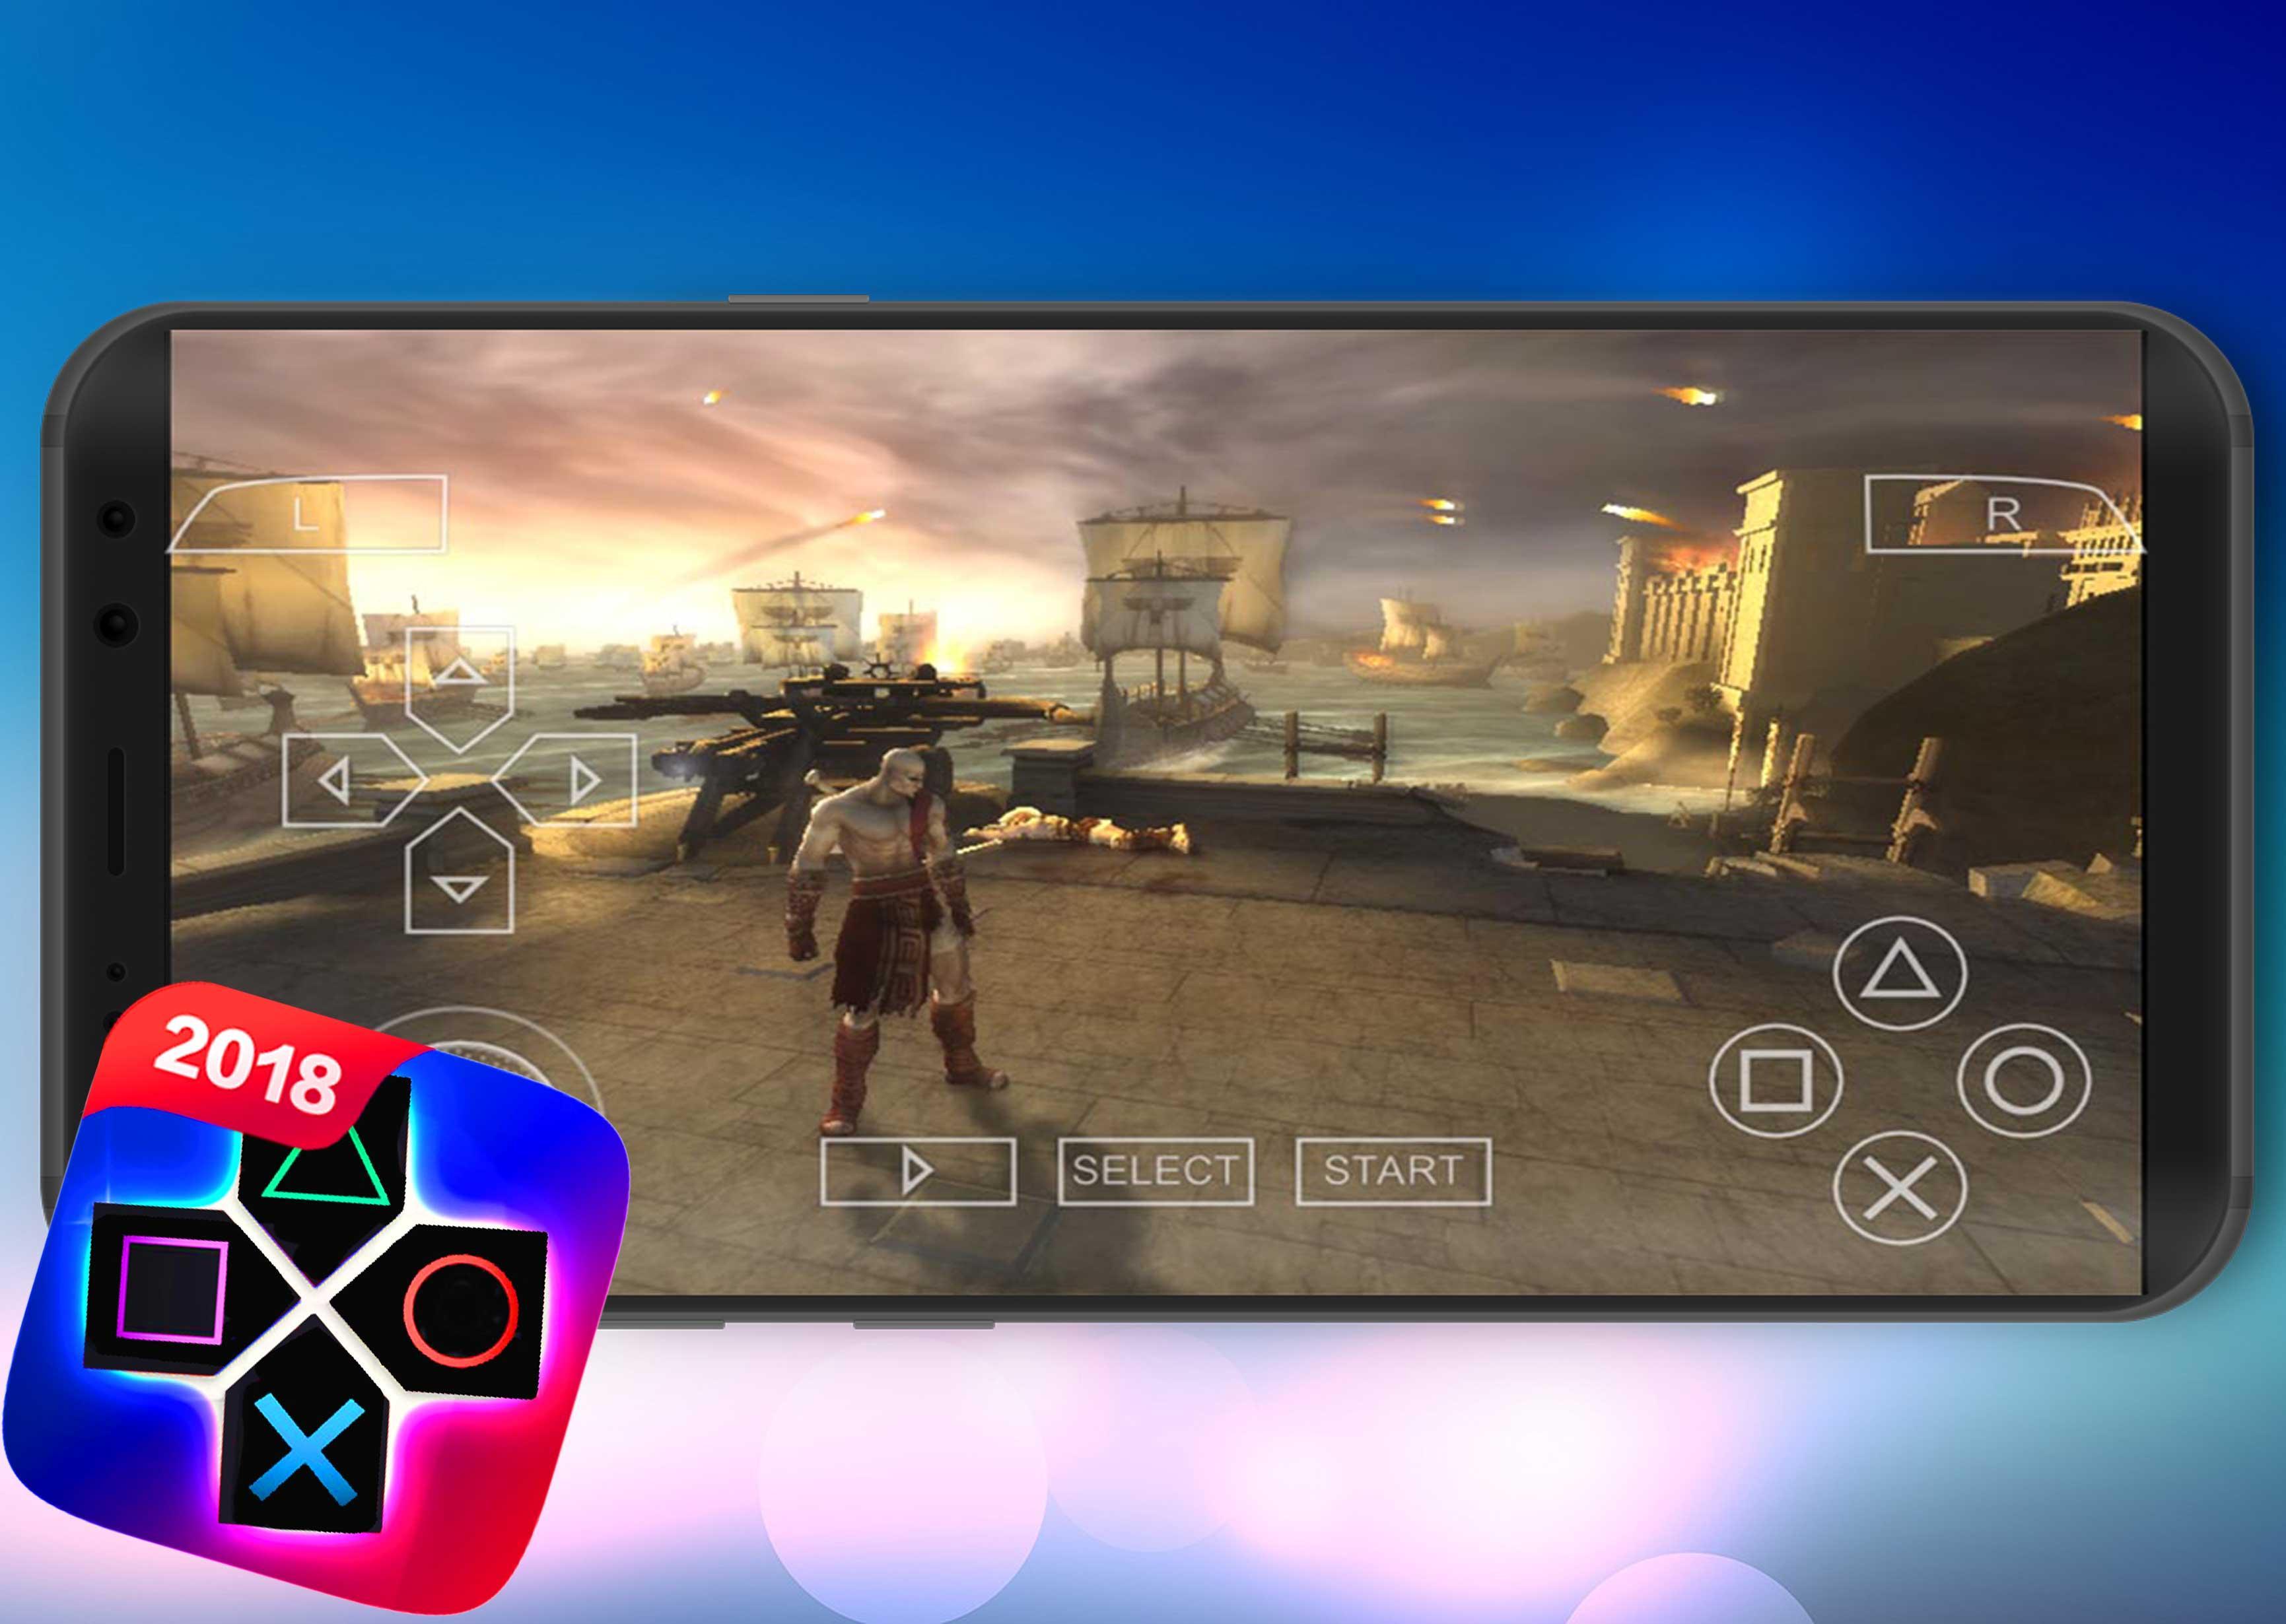 PPSSPP - New PSP Emulator Games for Android - APK Download